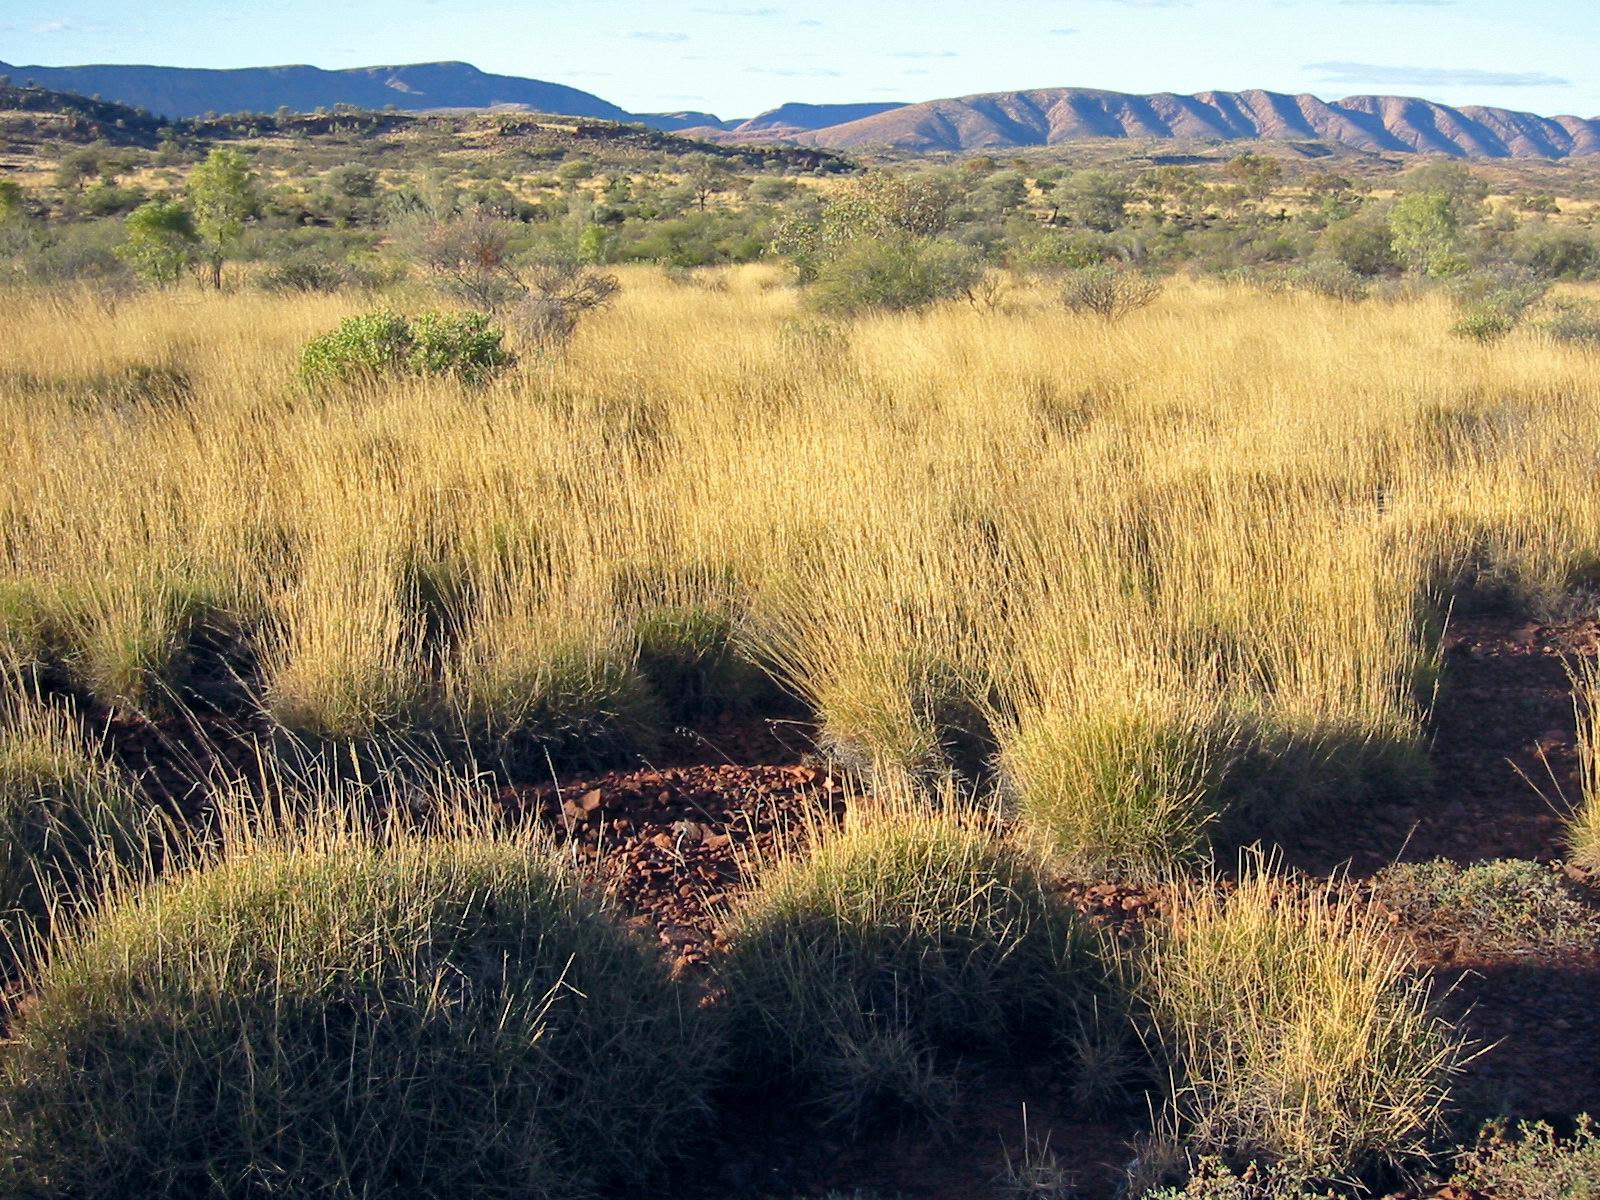 Photograph of an Australian savanna in the MacDonnell Ranges, Northern Territory. The photo shows bunches of yellow grass mixed with shrubs growing on a relatively flat landscape with hills rising in the background.